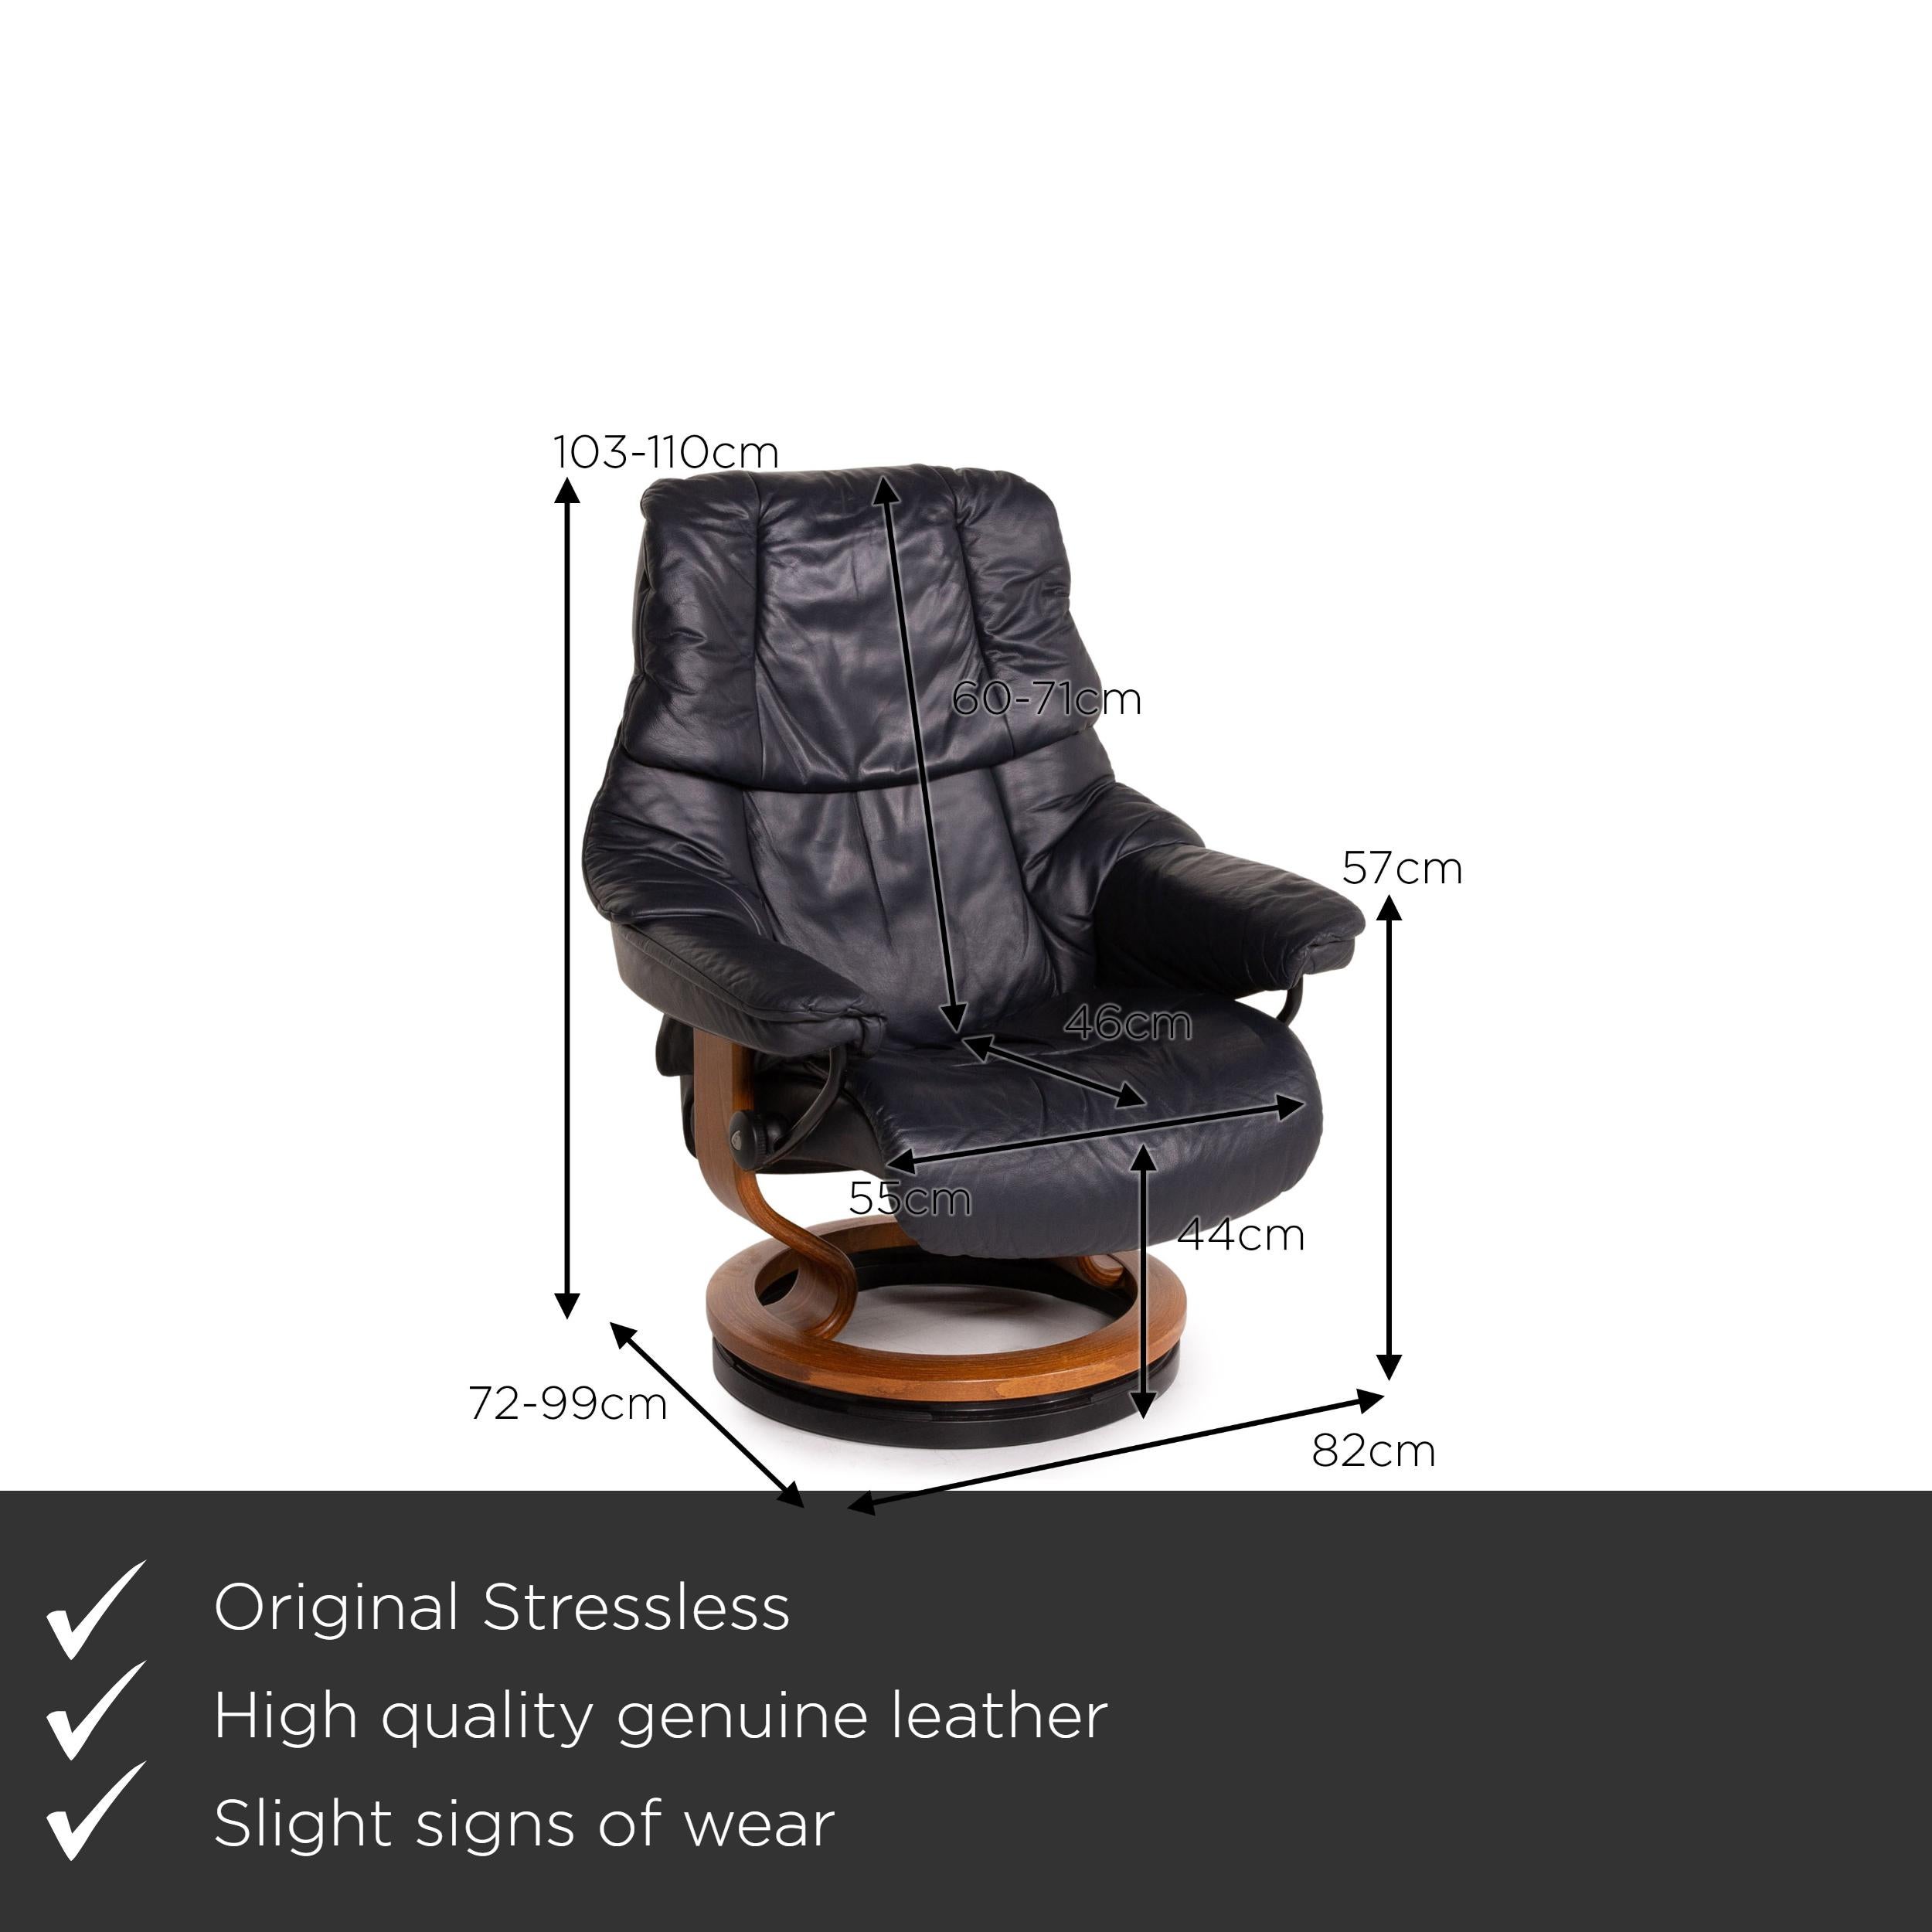 We present to you a stressless reno leather armchair incl. Stool dark blue blue relaxation function.

 

 Product measurements in centimeters:
 

Depth 72
Width 82
Height 103
Seat height 44
Rest height 57
Seat depth 46
Seat width